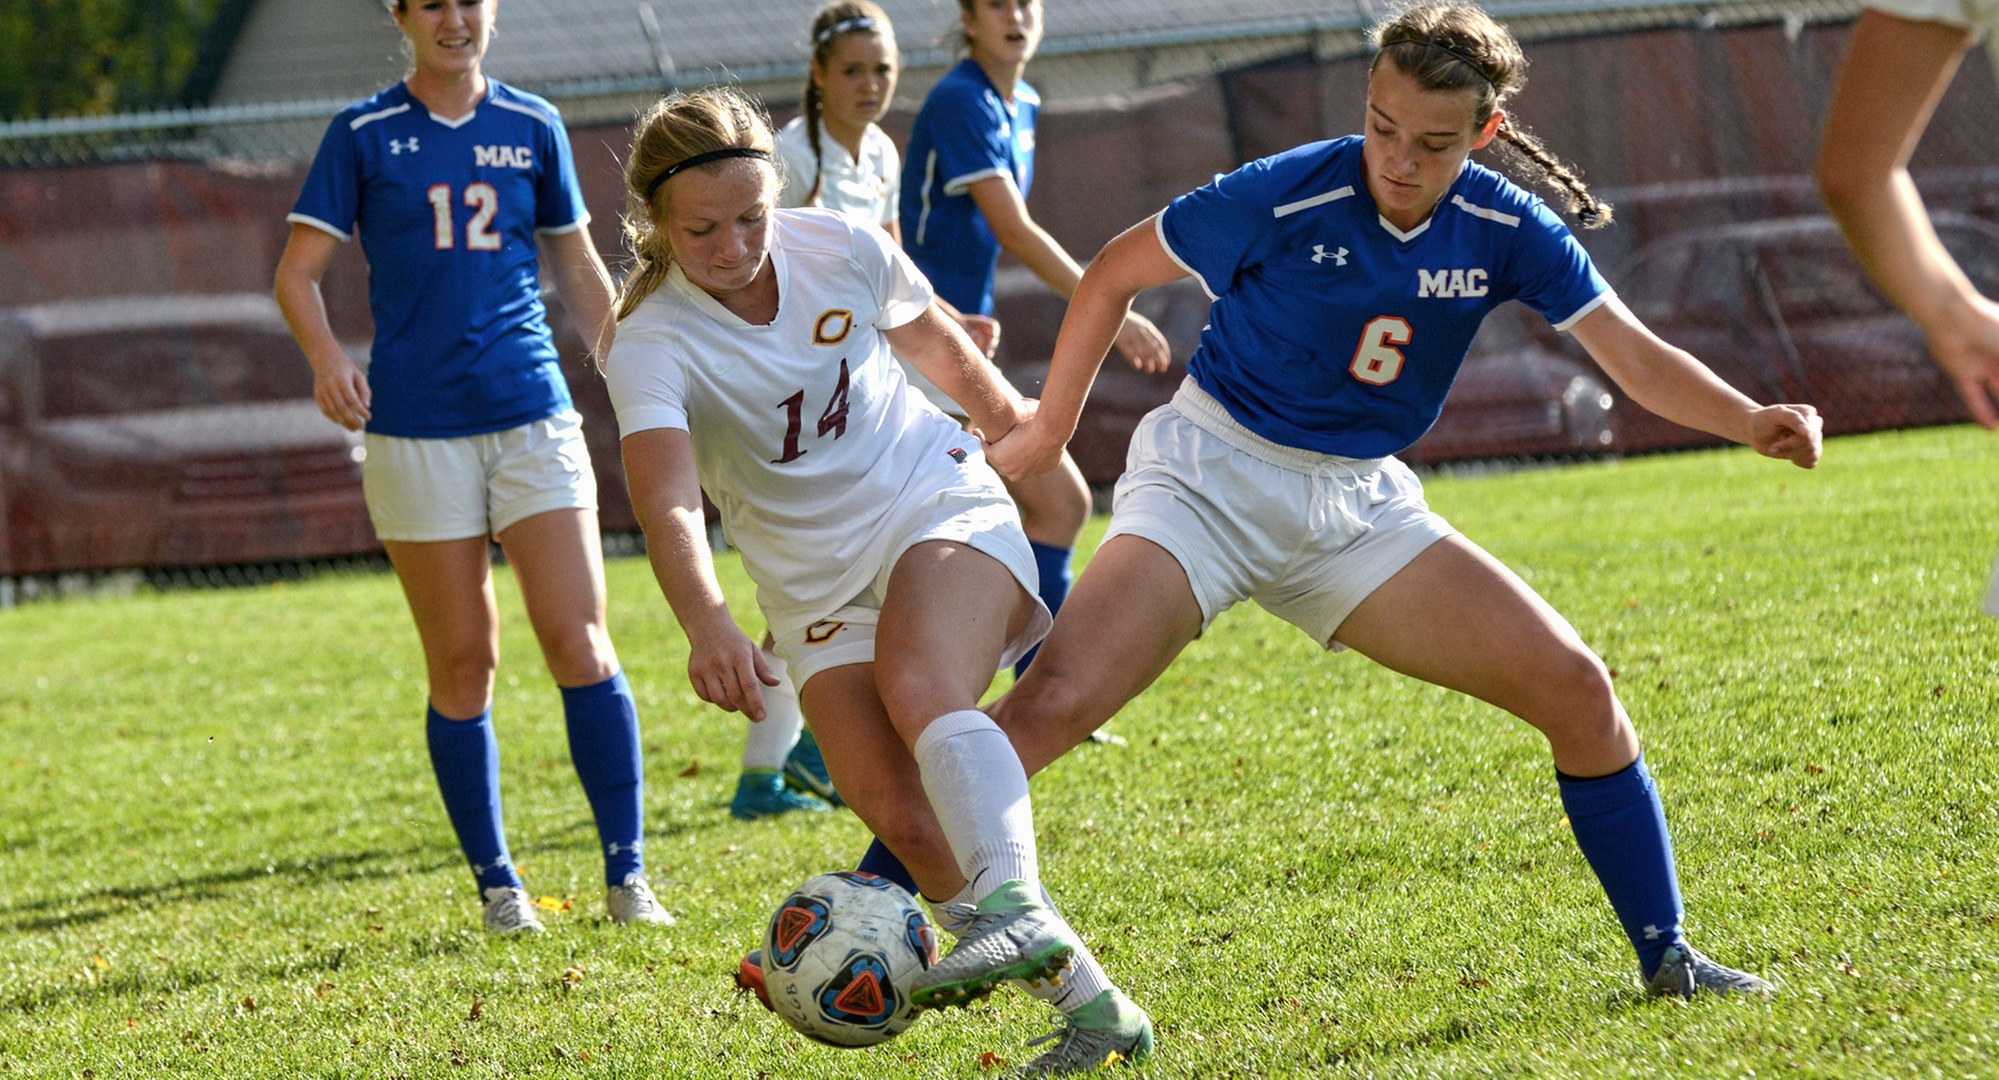 Freshman Klara Beinhorn wins the ball from a Macalester player. Beinhorn scored the game-winning goal with 63 seconds left in the second overtime.